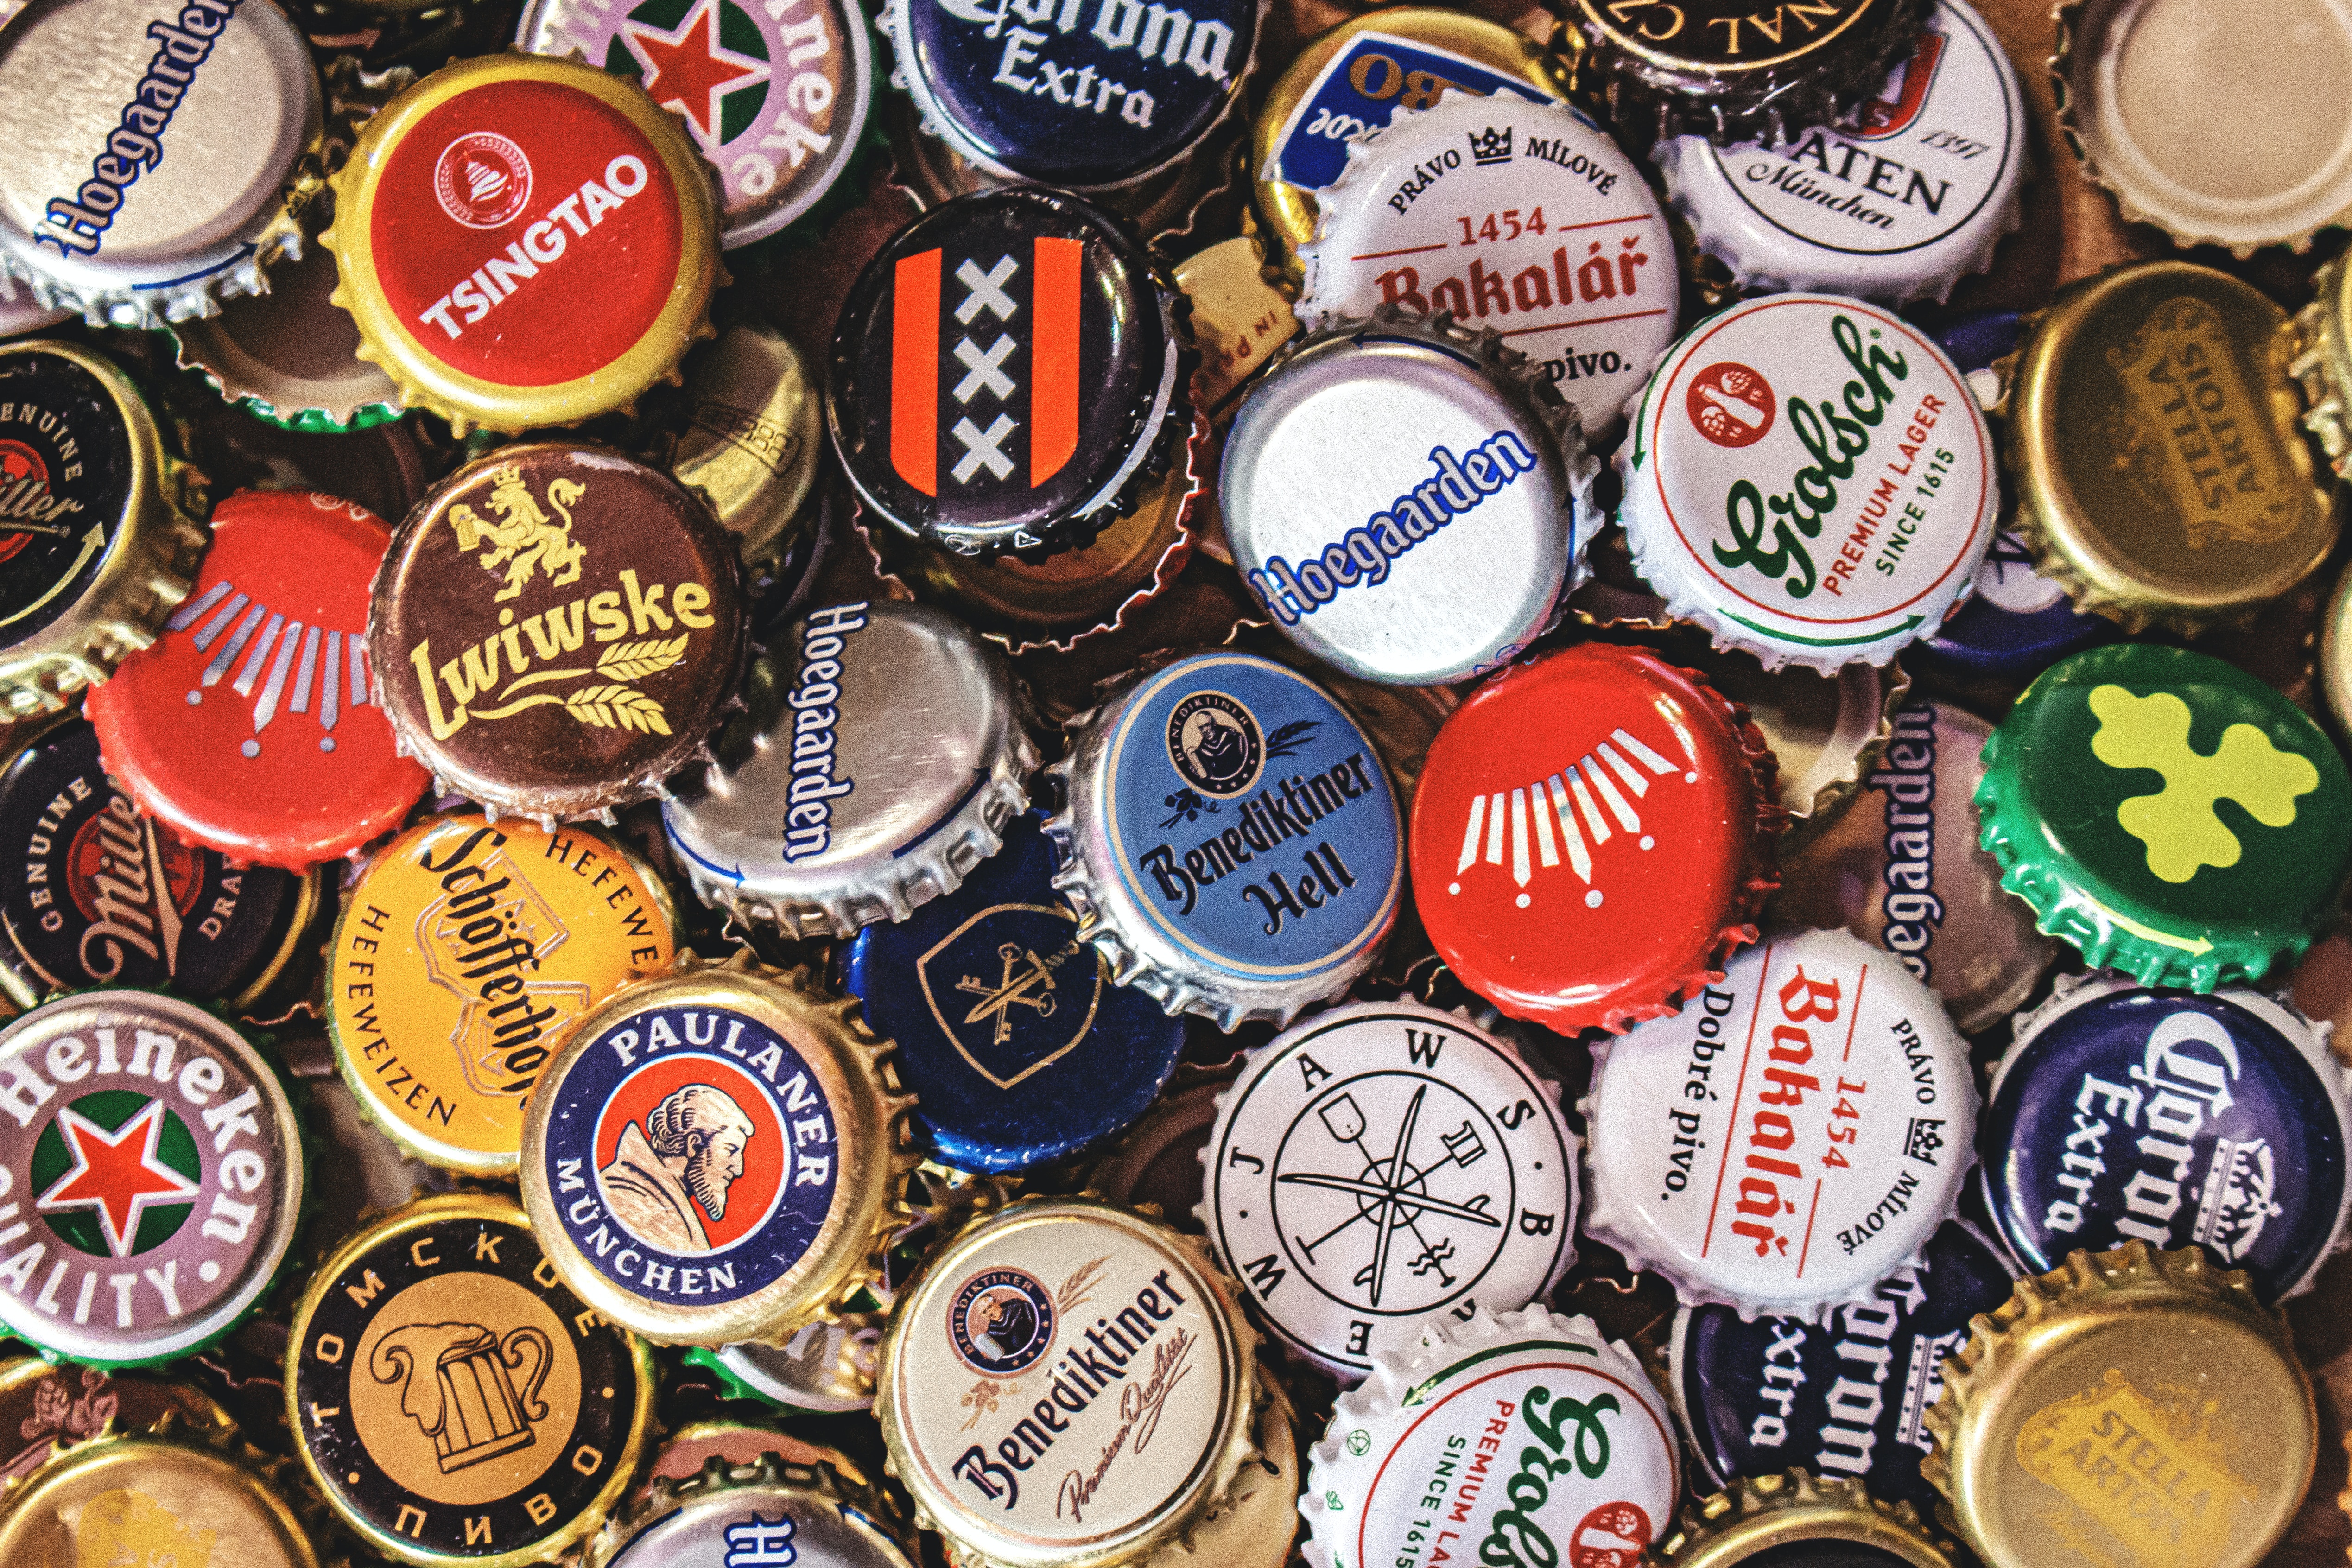 Bottle caps with different beer logos